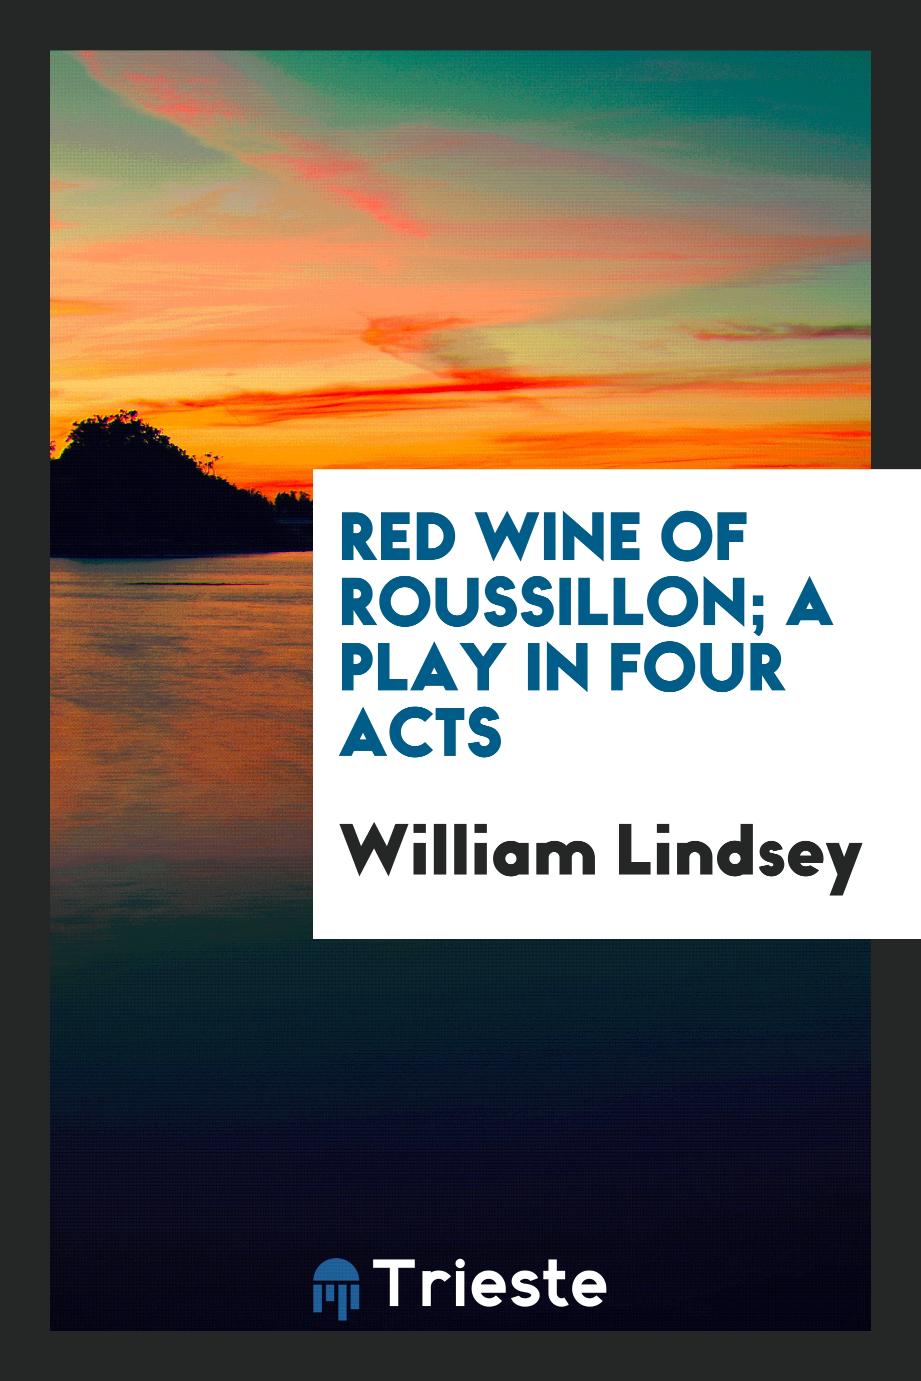 Red wine of Roussillon; a play in four acts